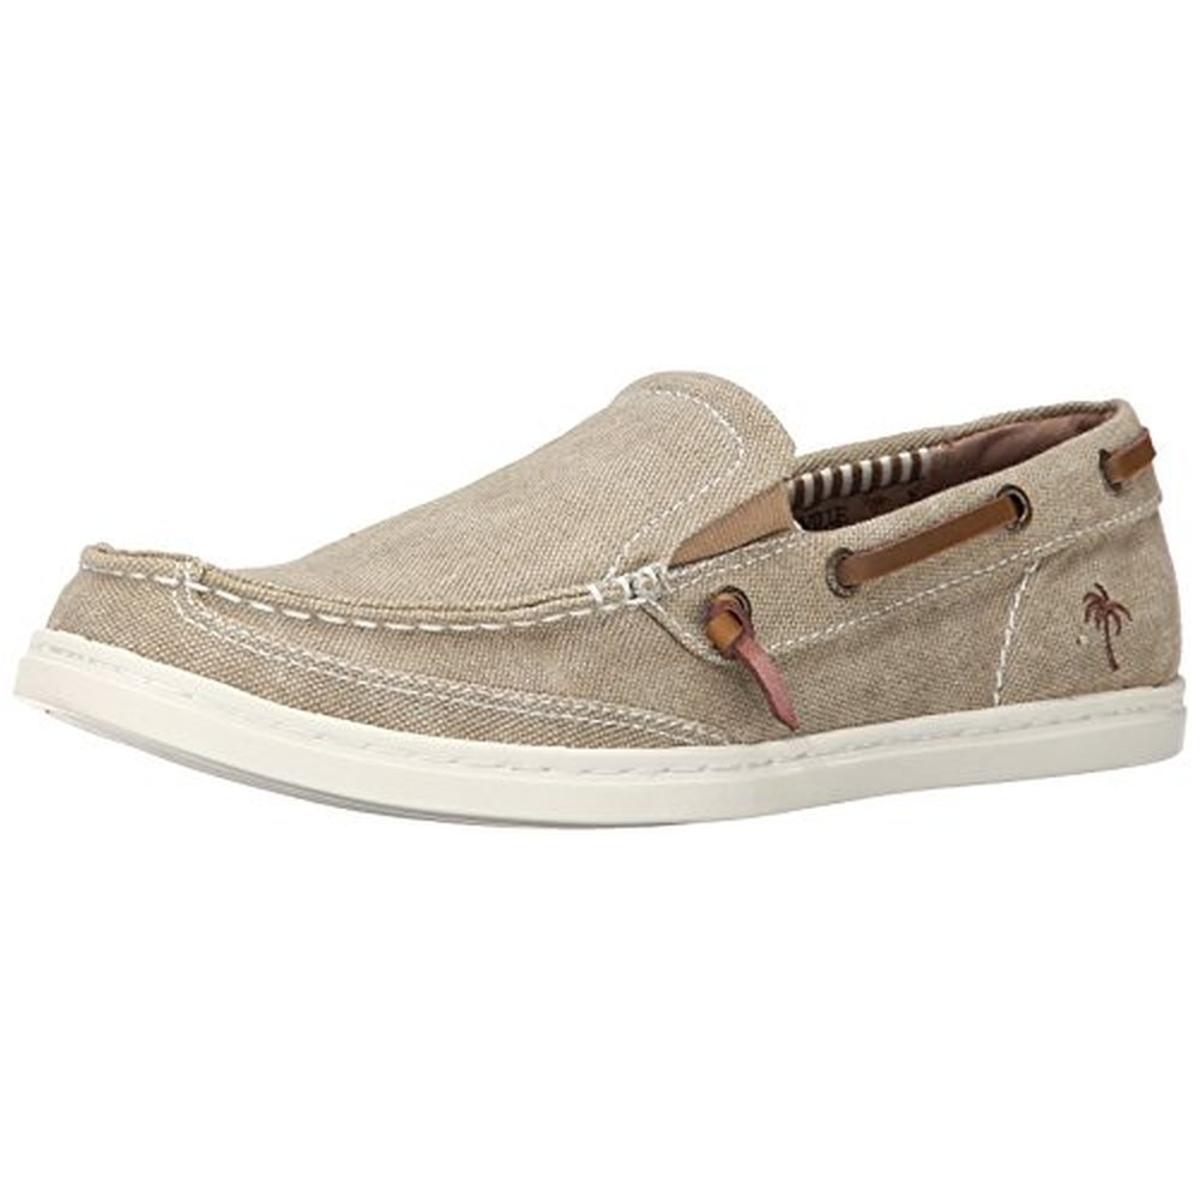 Margaritaville 7304 Mens Dock Tan Canvas Stretch Loafers Boat Shoes 12 ...